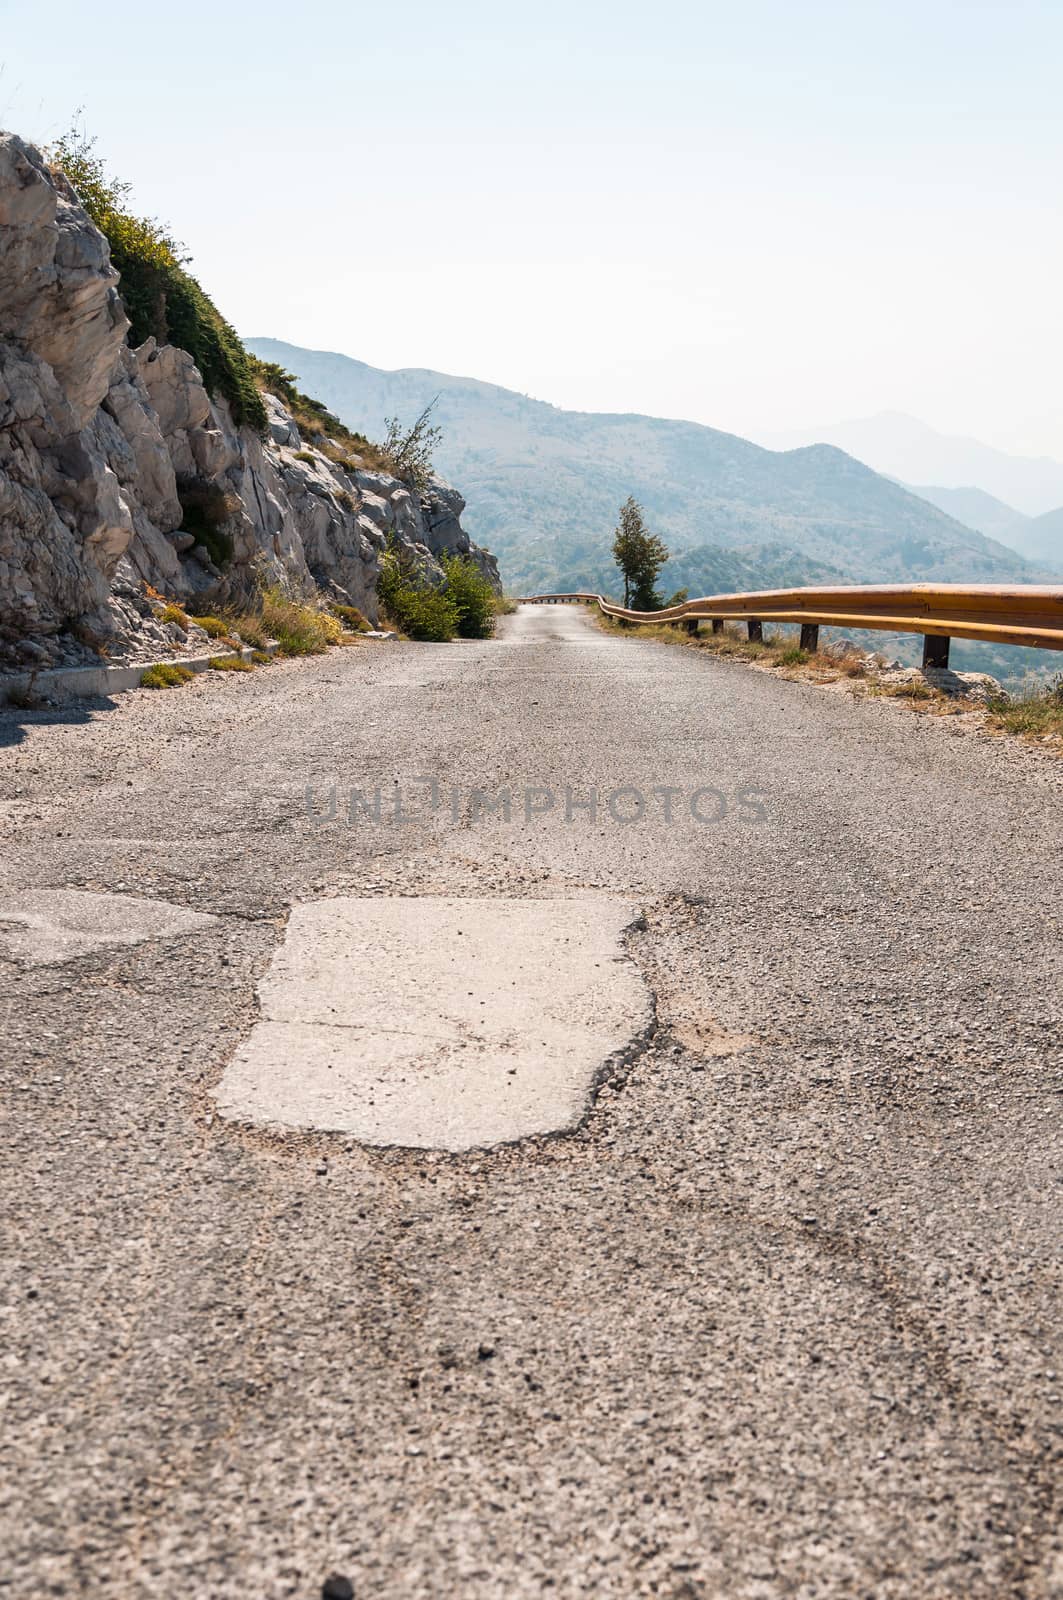 Road in Biokovo mountains by mkos83